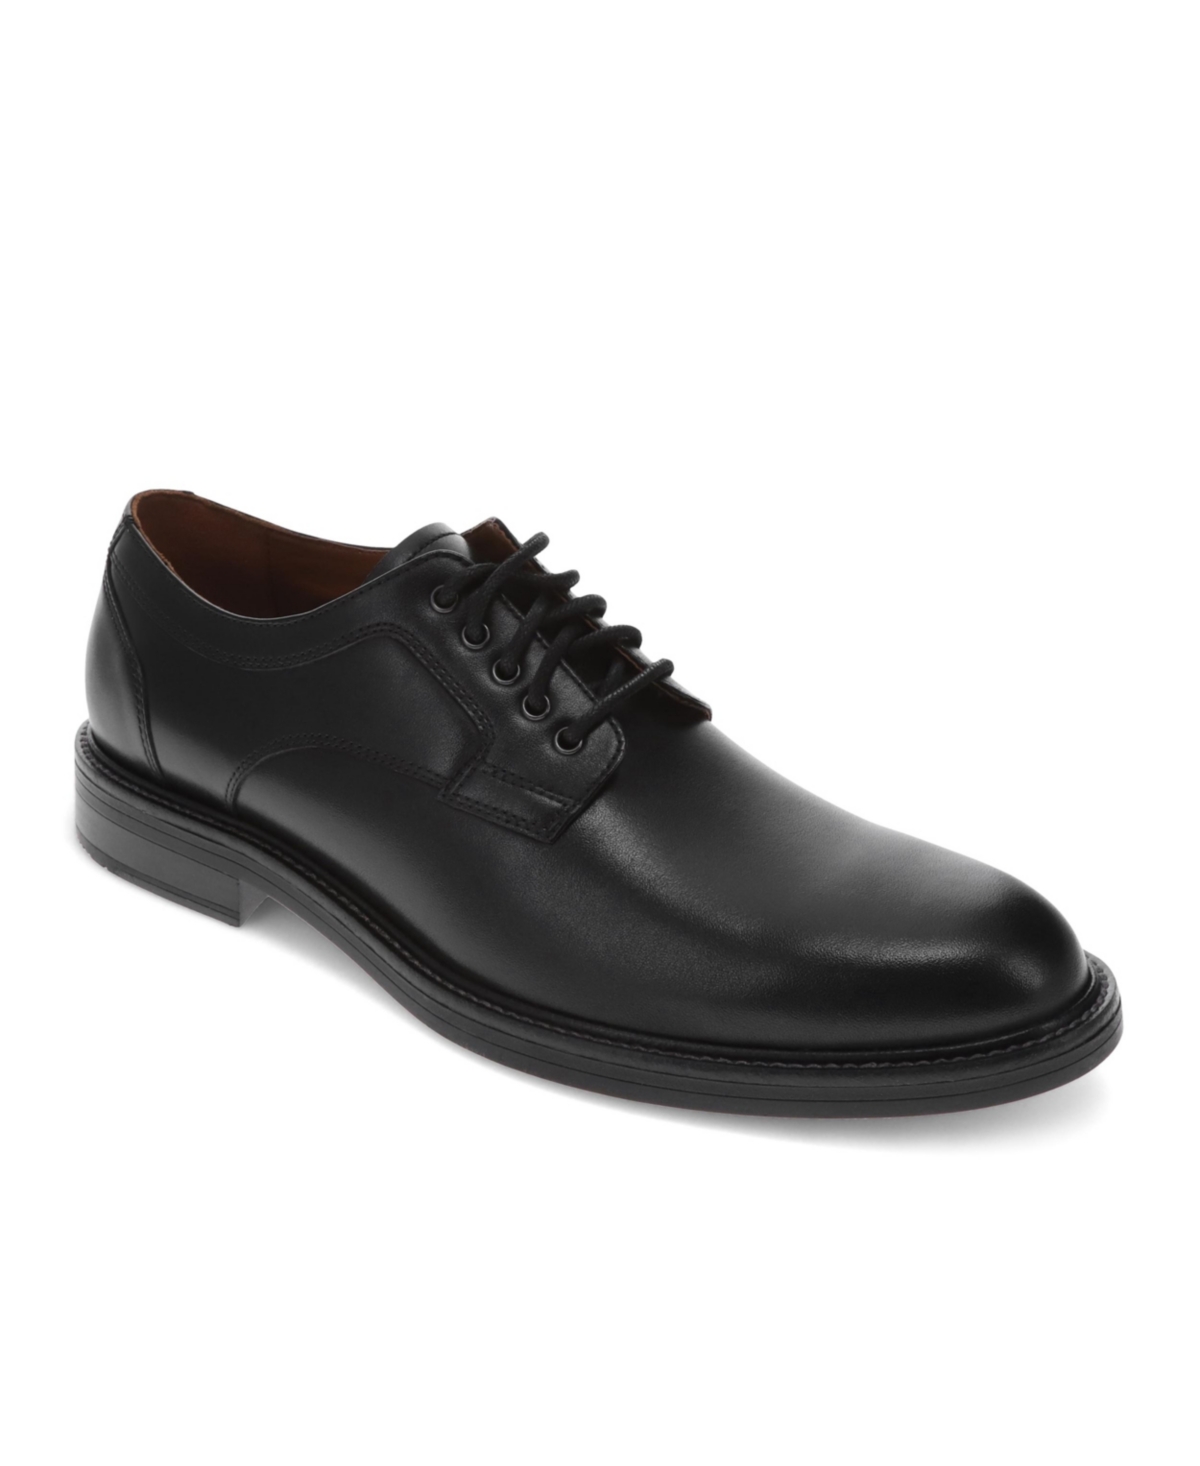 Dockers Men's Ludgate Oxford Shoes In Black